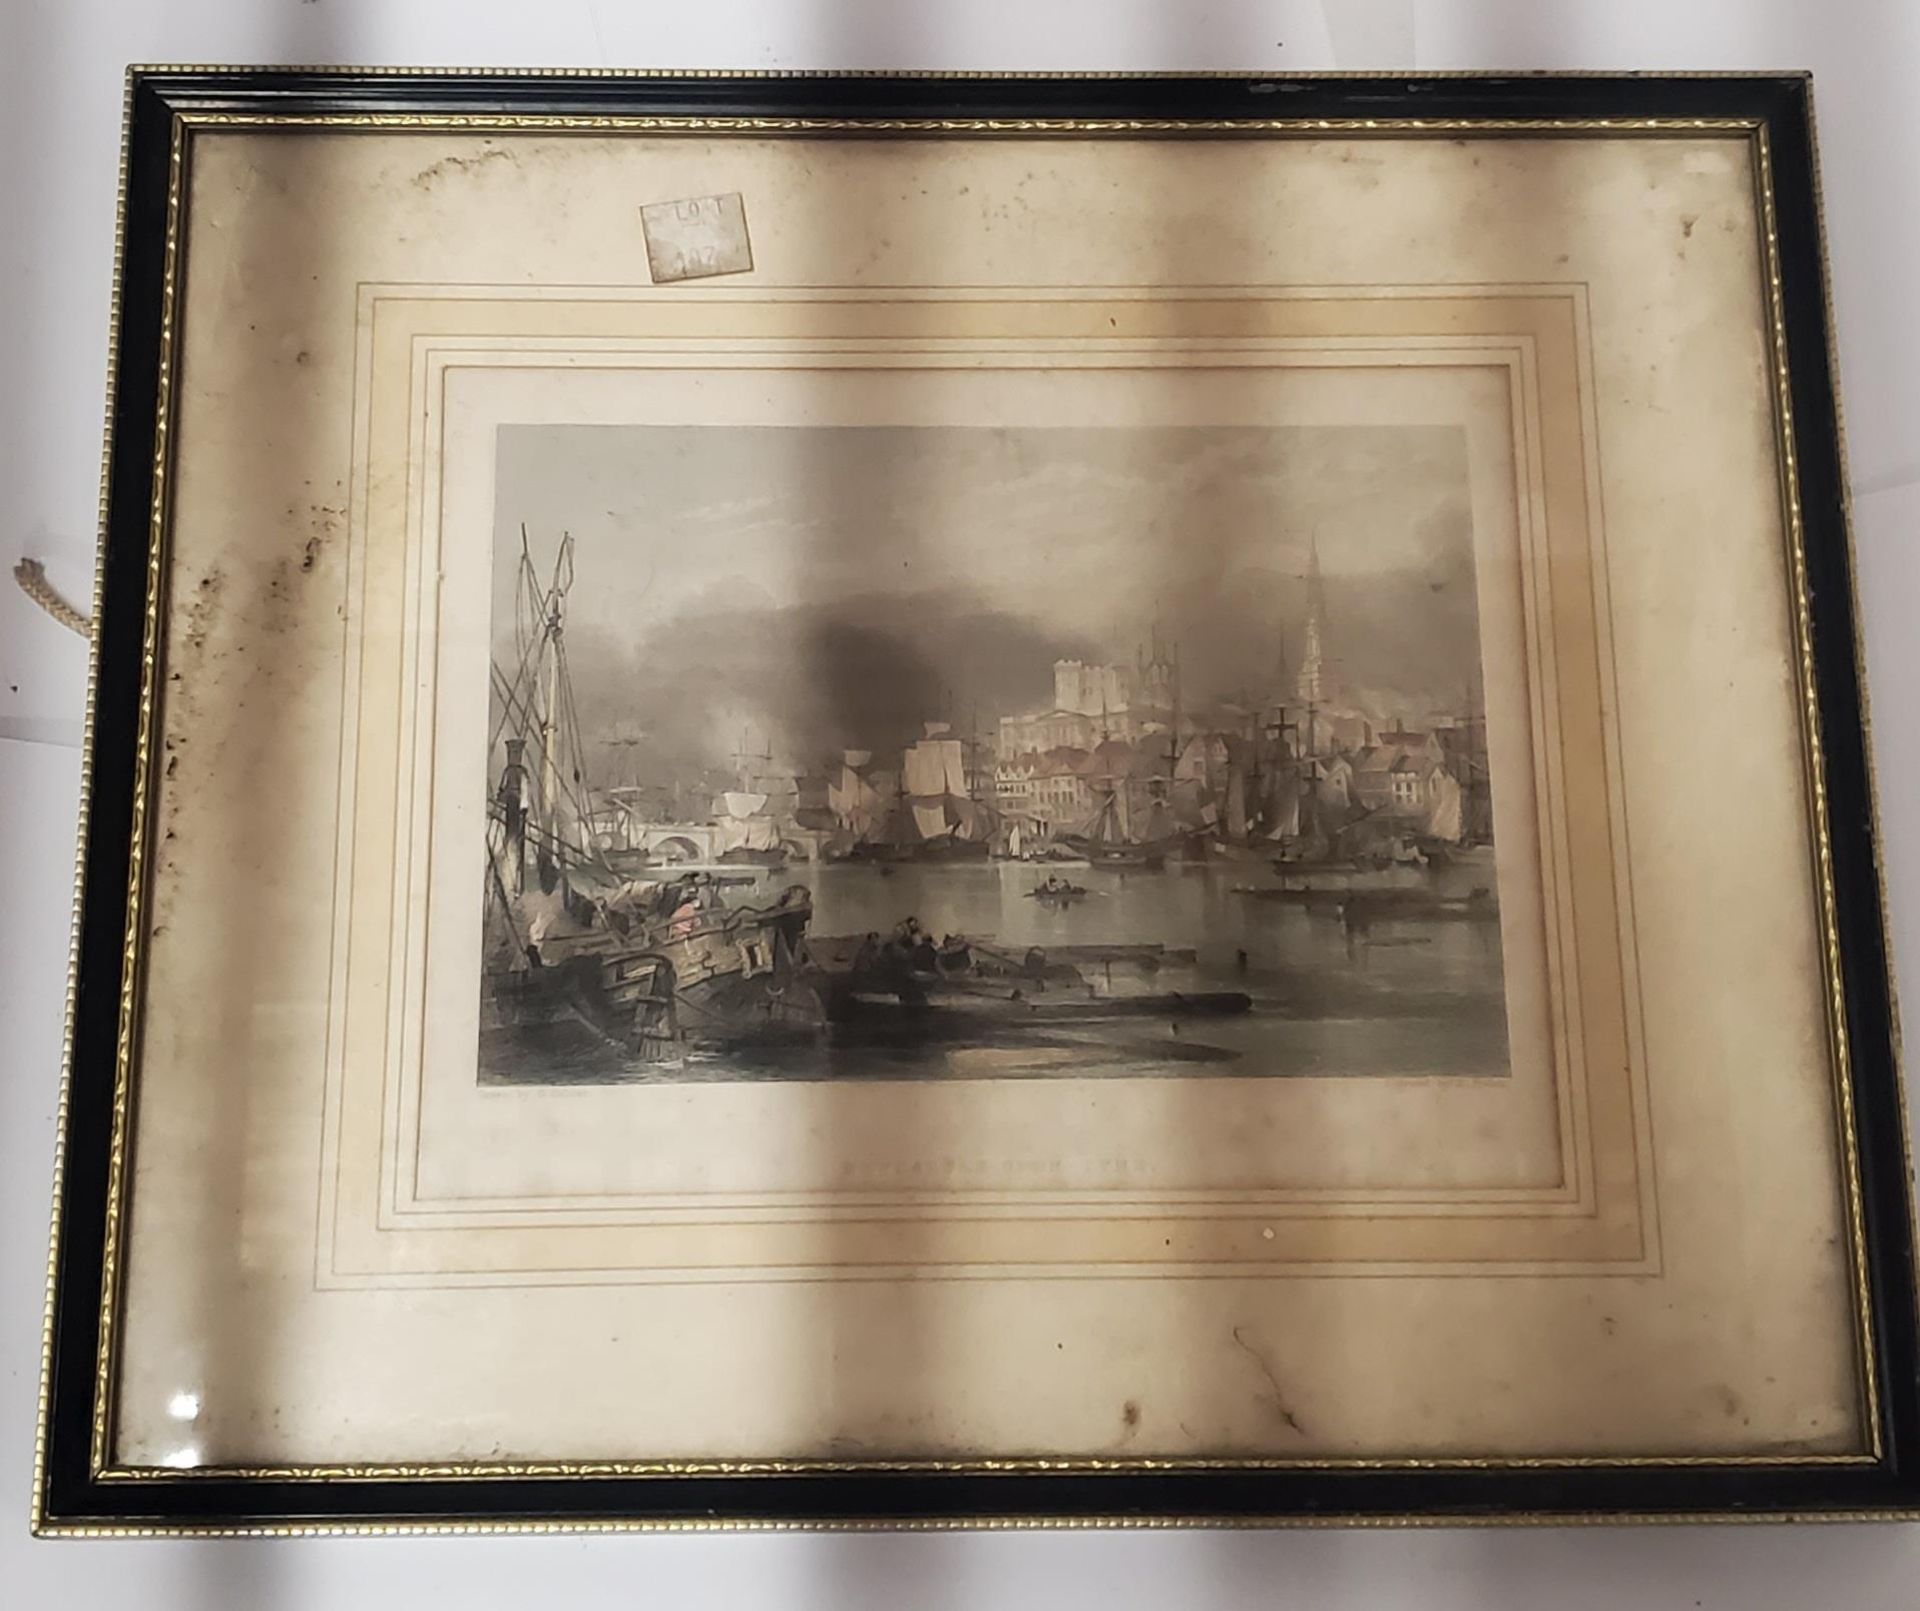 SIX VINTAGE FRAMED PRINTS TO INCLUDE 'THE YULE LOG IN INDIA-BRINGING IN THE ICE', SHIPS, - Image 4 of 5